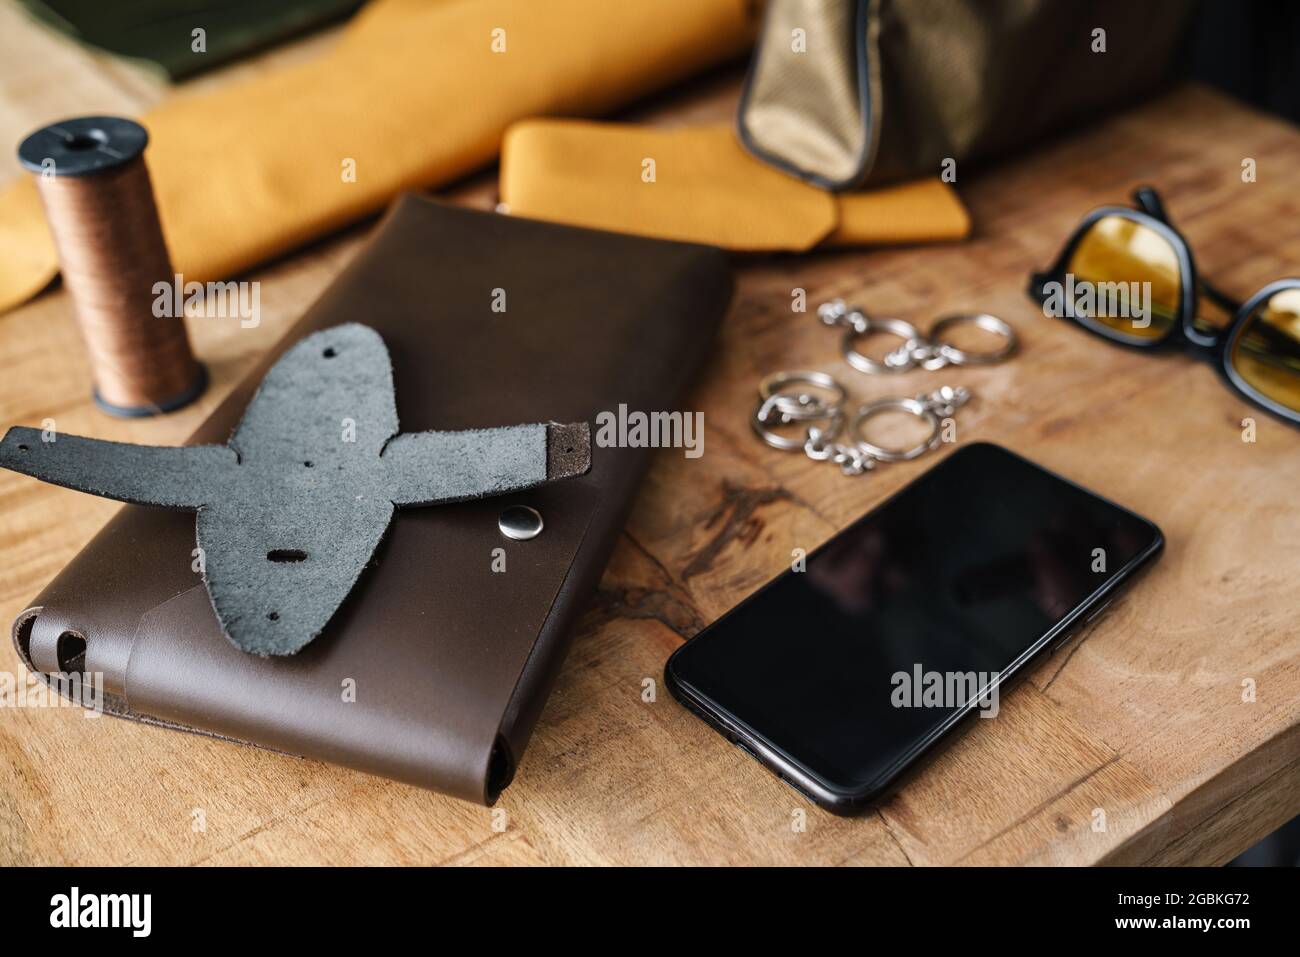 Leather bag and mobile phone on wooden table indoors Stock Photo